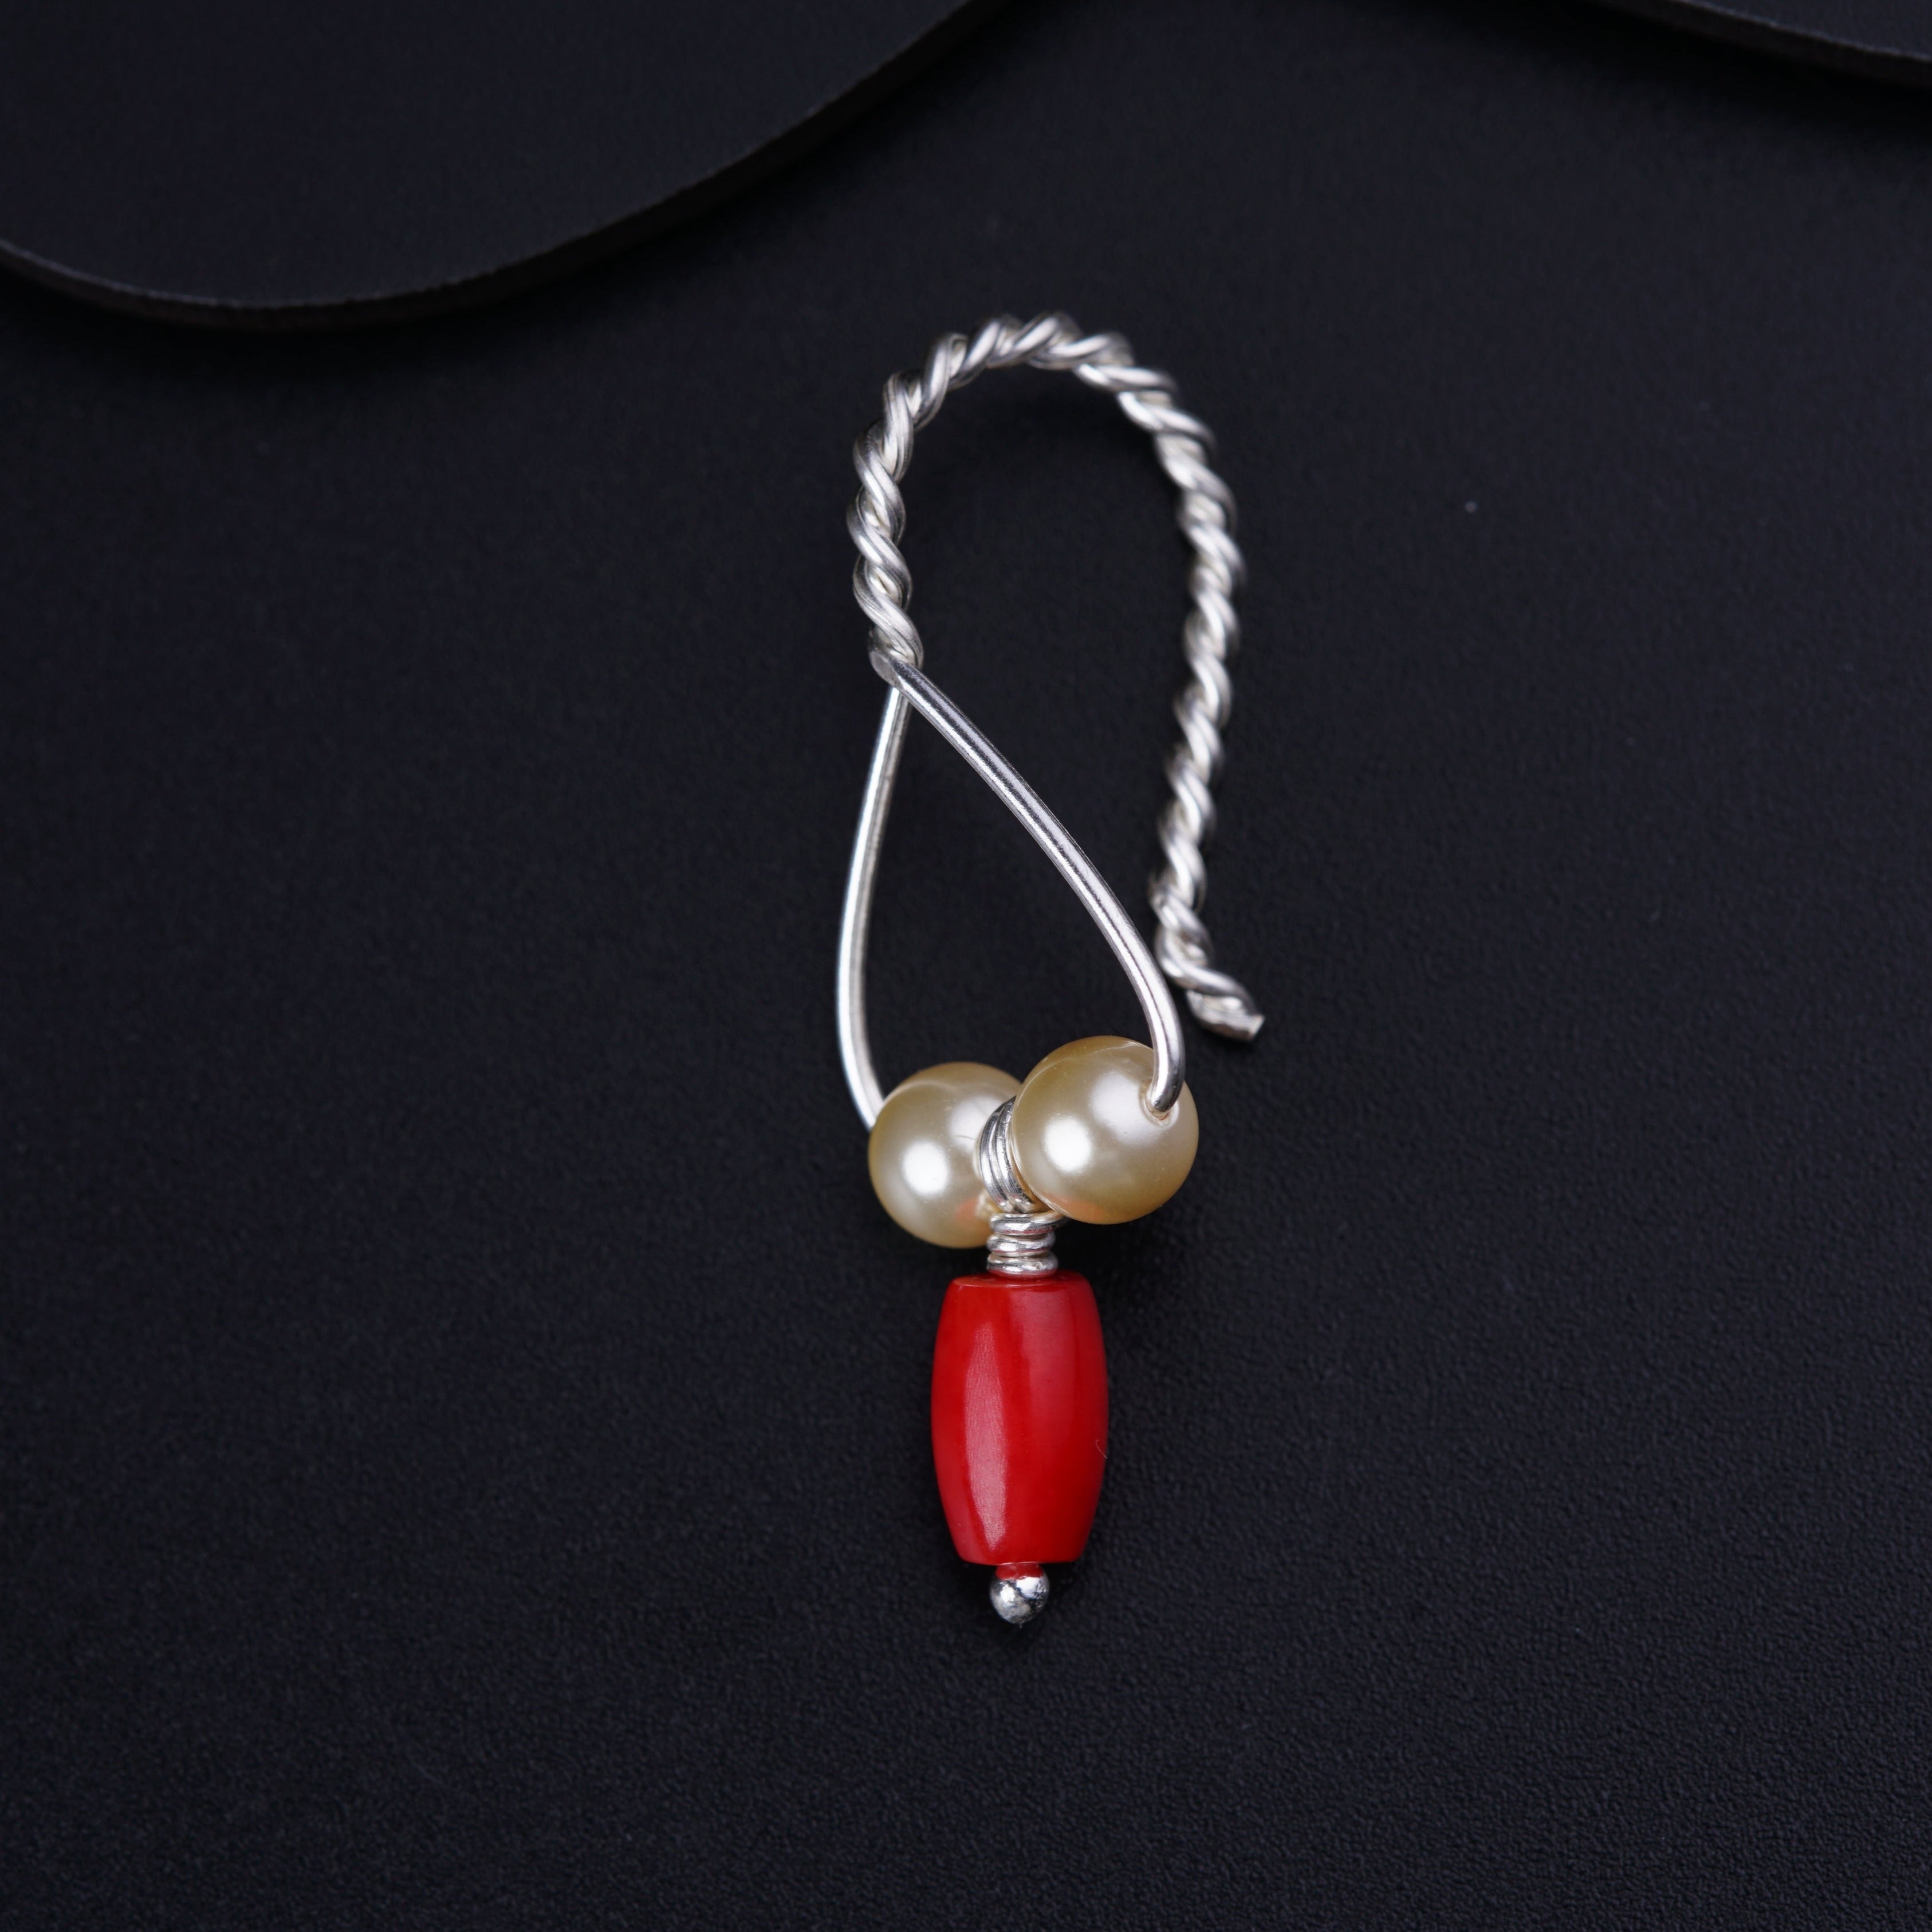 a necklace with a red bead and two pearls